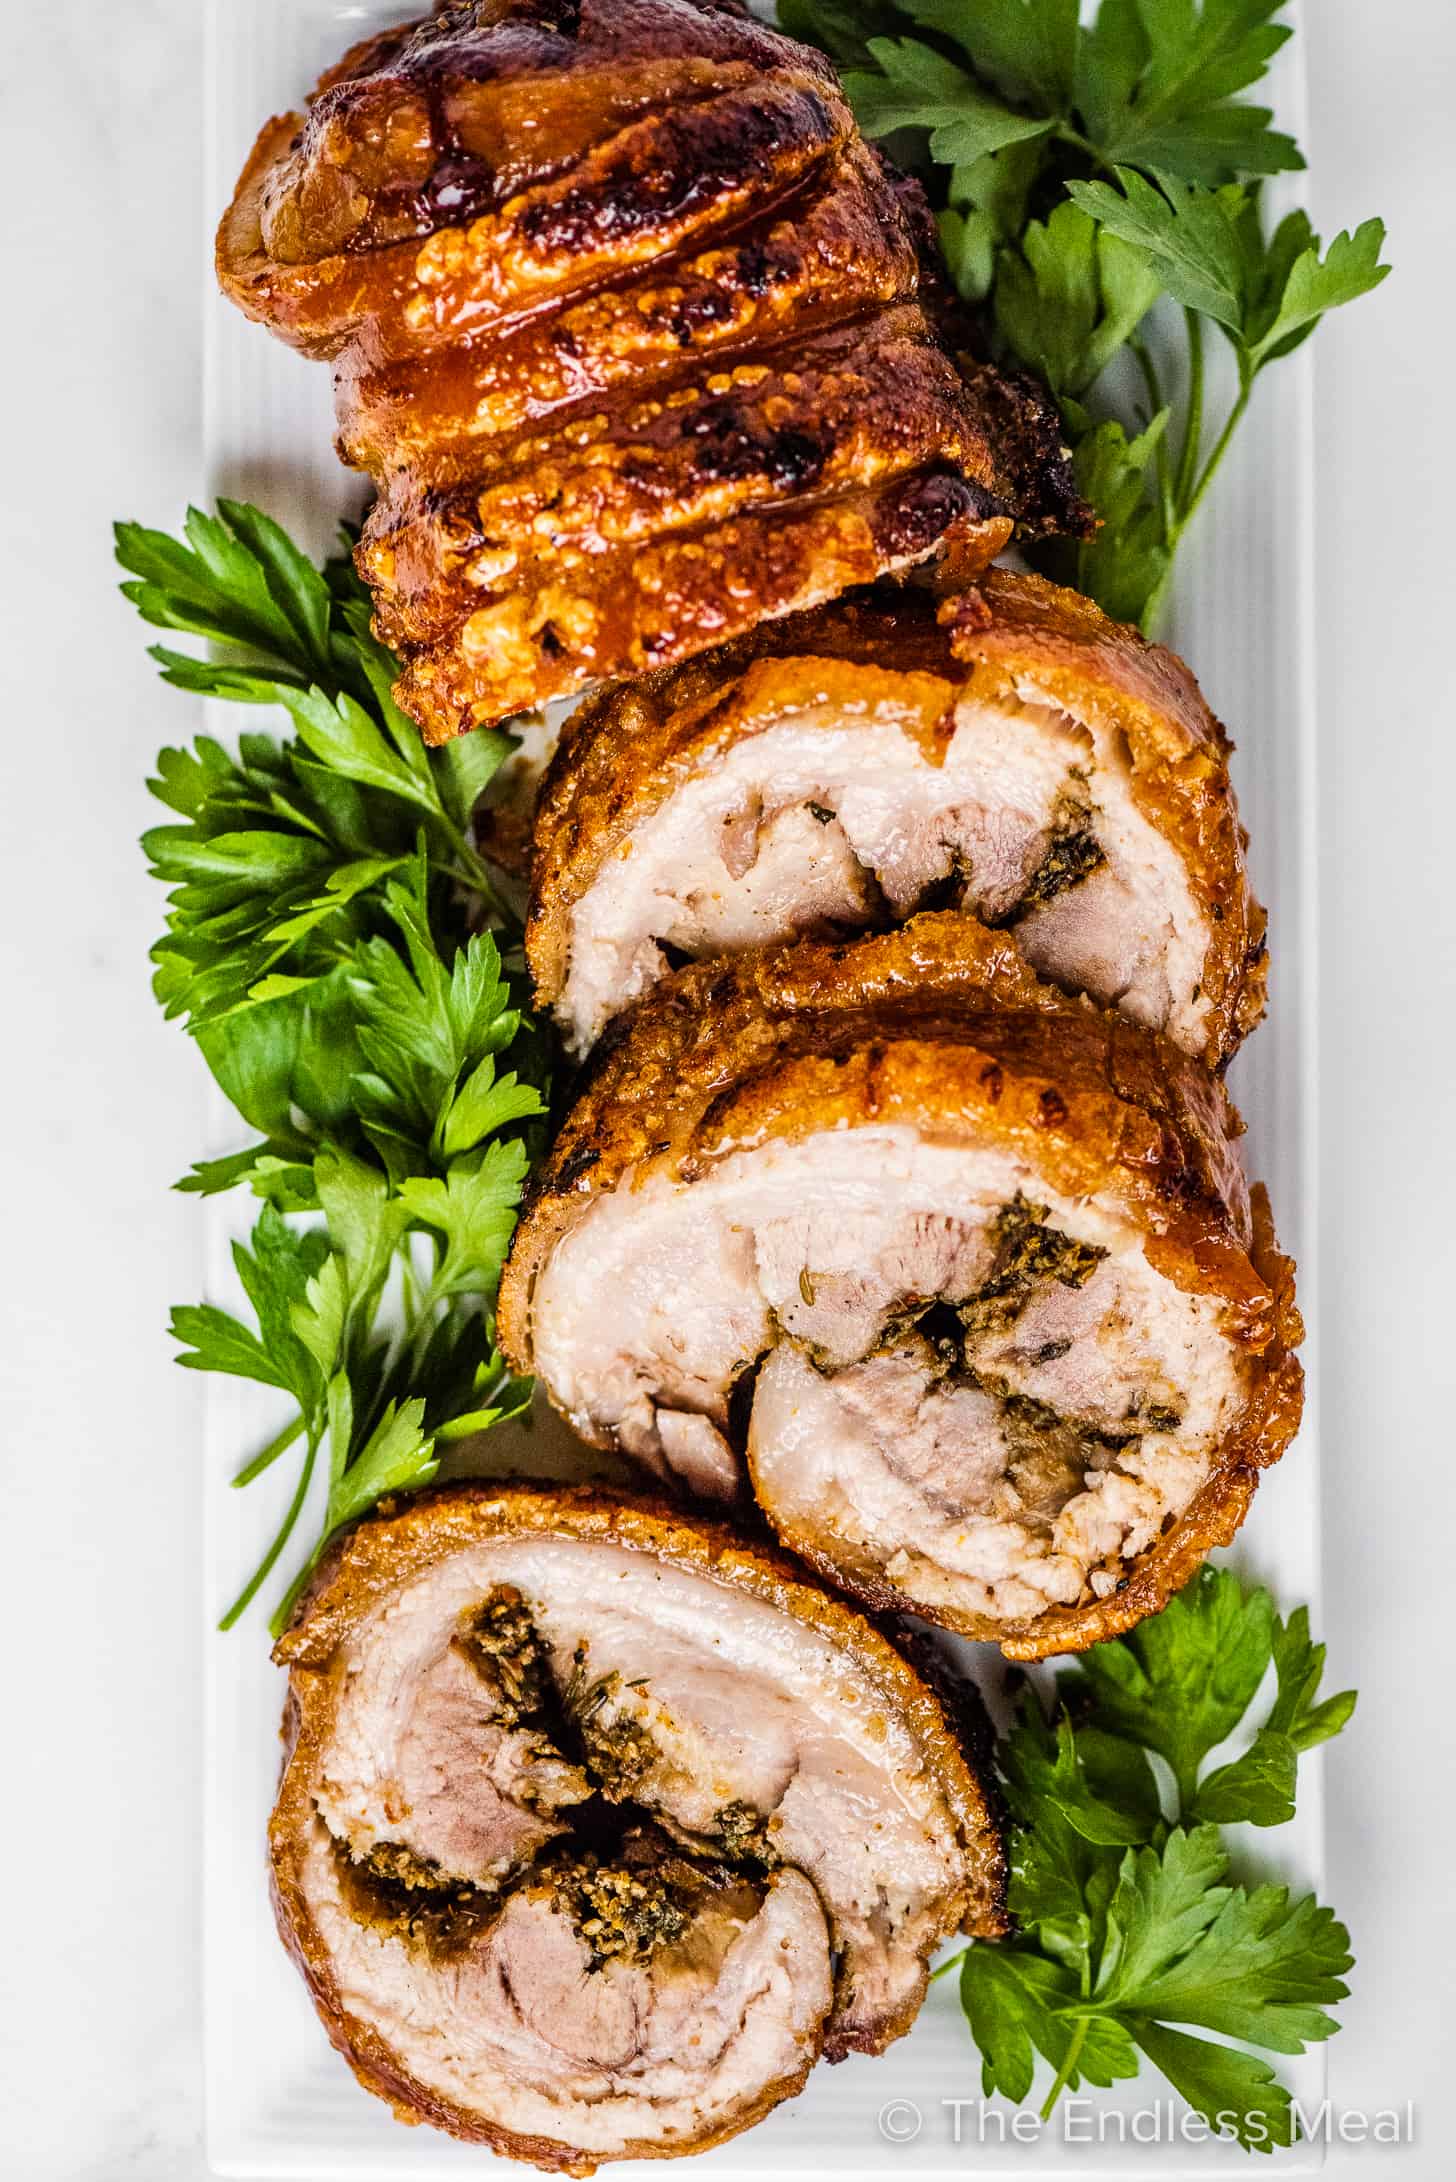 Porchetta sliced into rounds on a serving tray with Italian parsley.